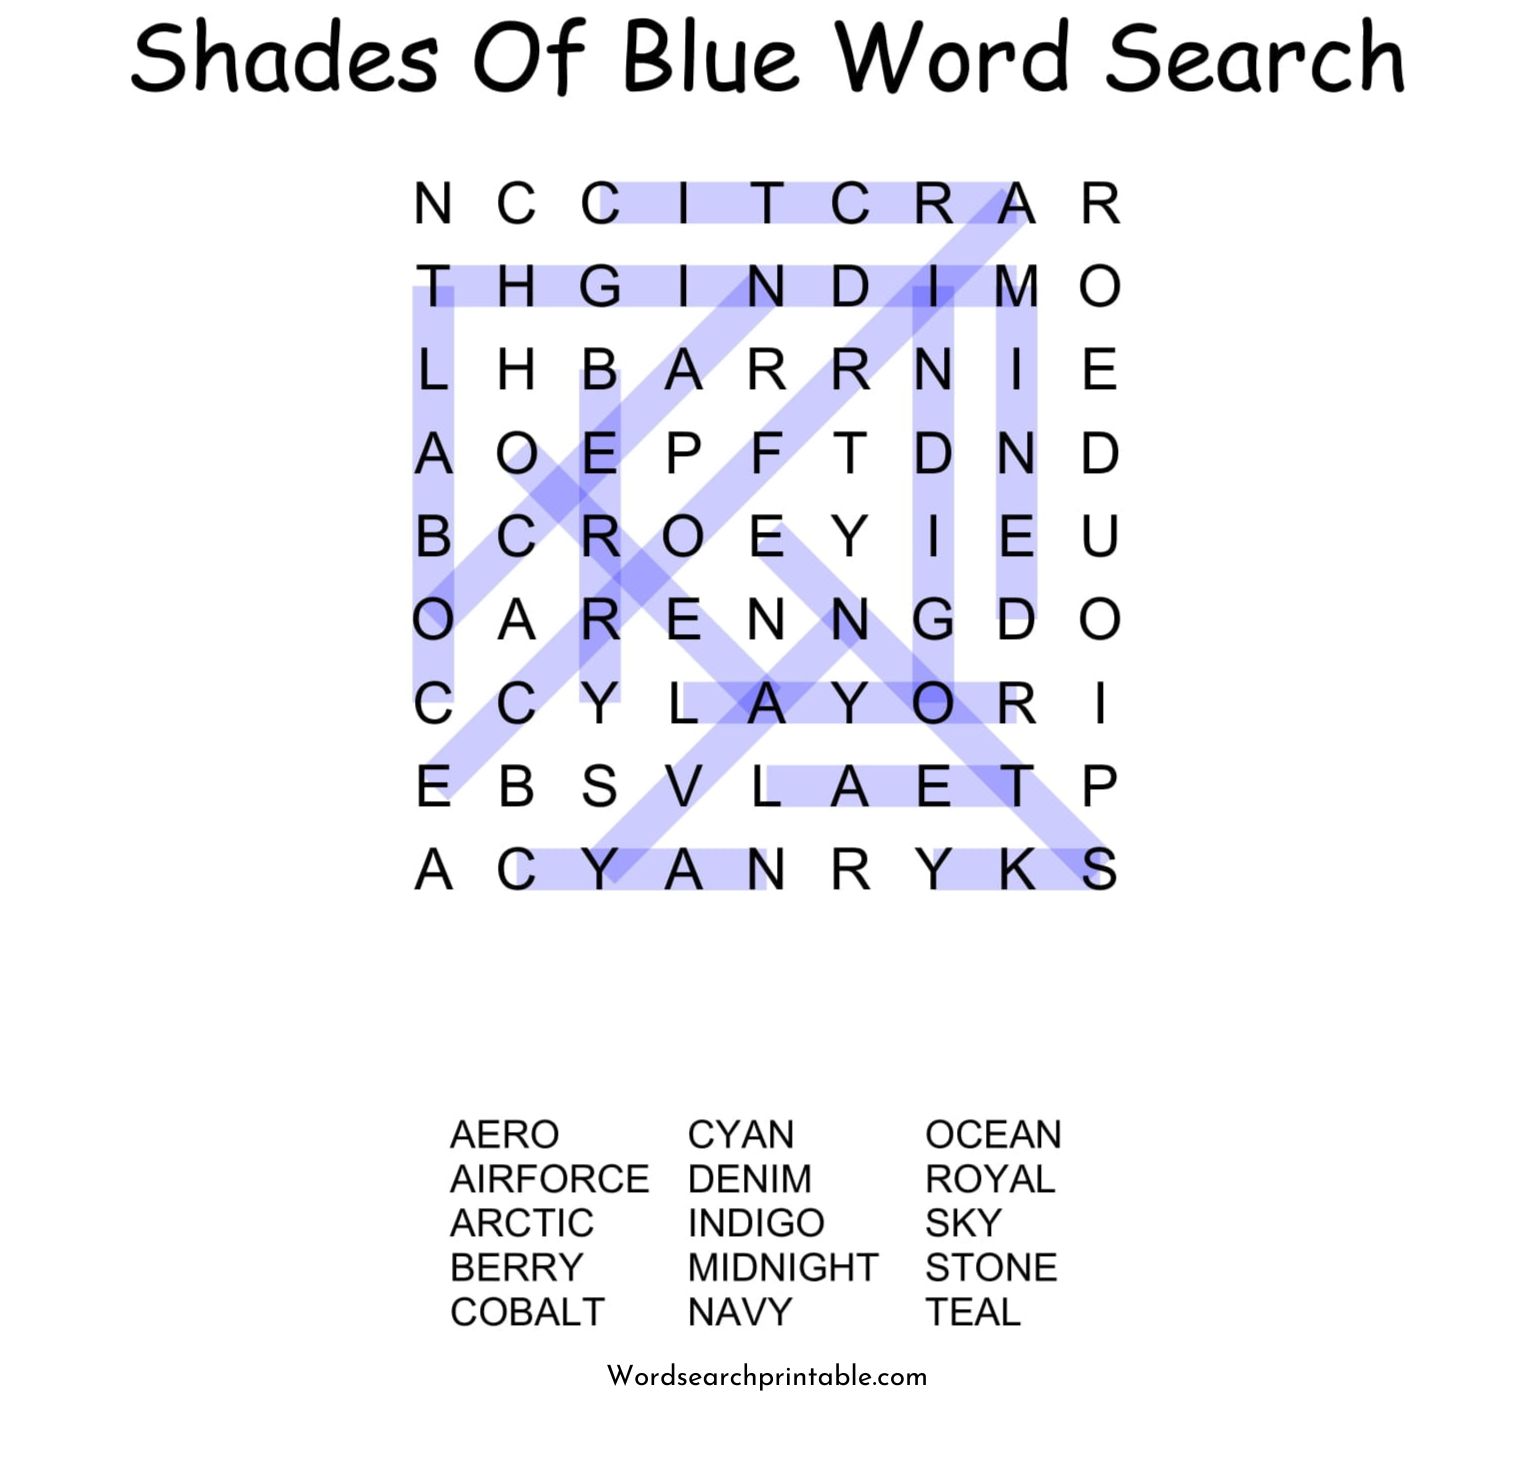 shades of blue word search puzzle solution